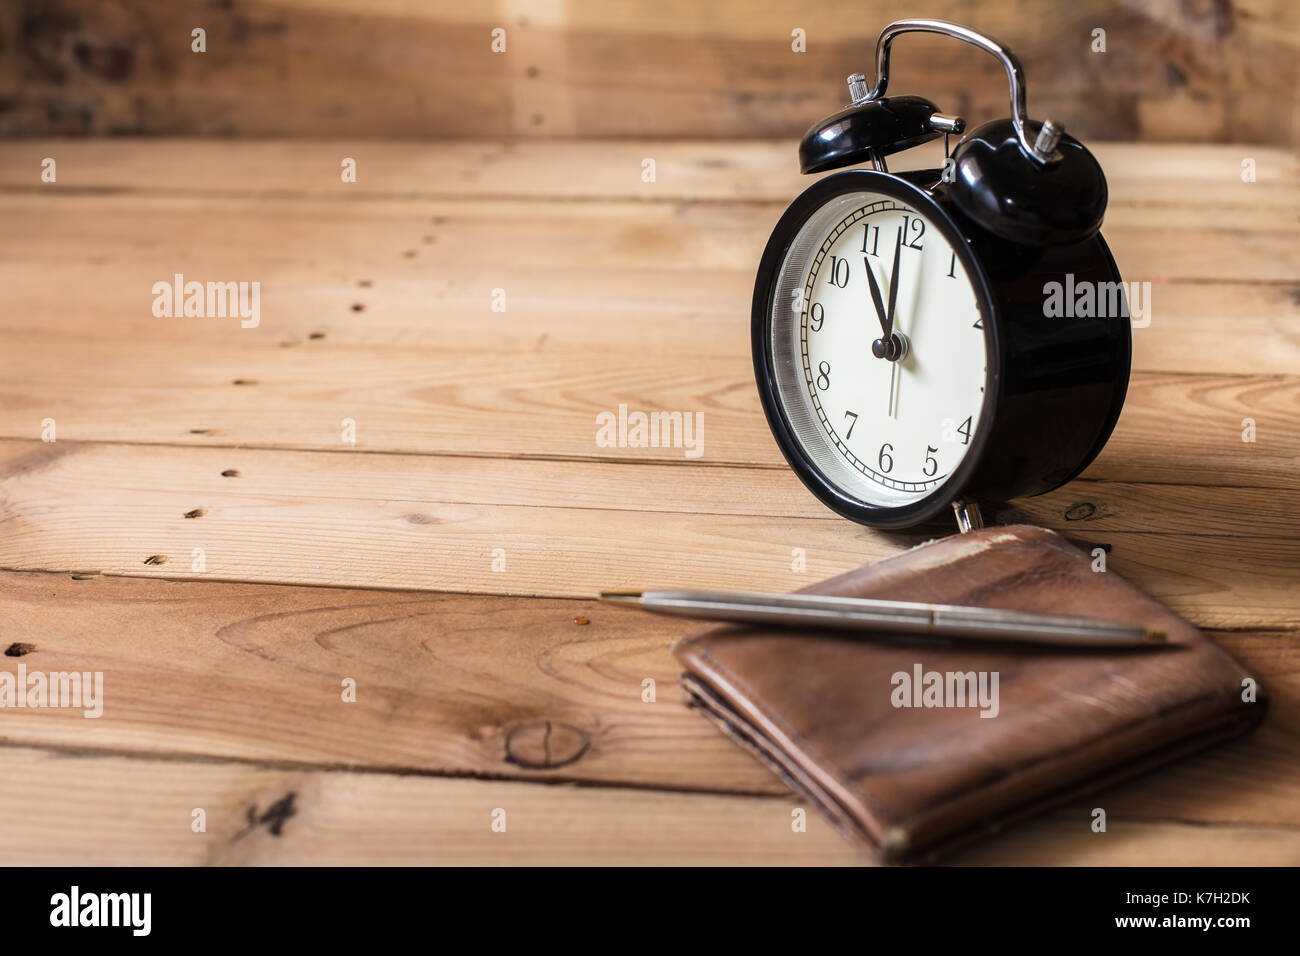 time to payment concept. retro bell clock timed at 11 o'clock on wood background with old leather wallet Stock Photo